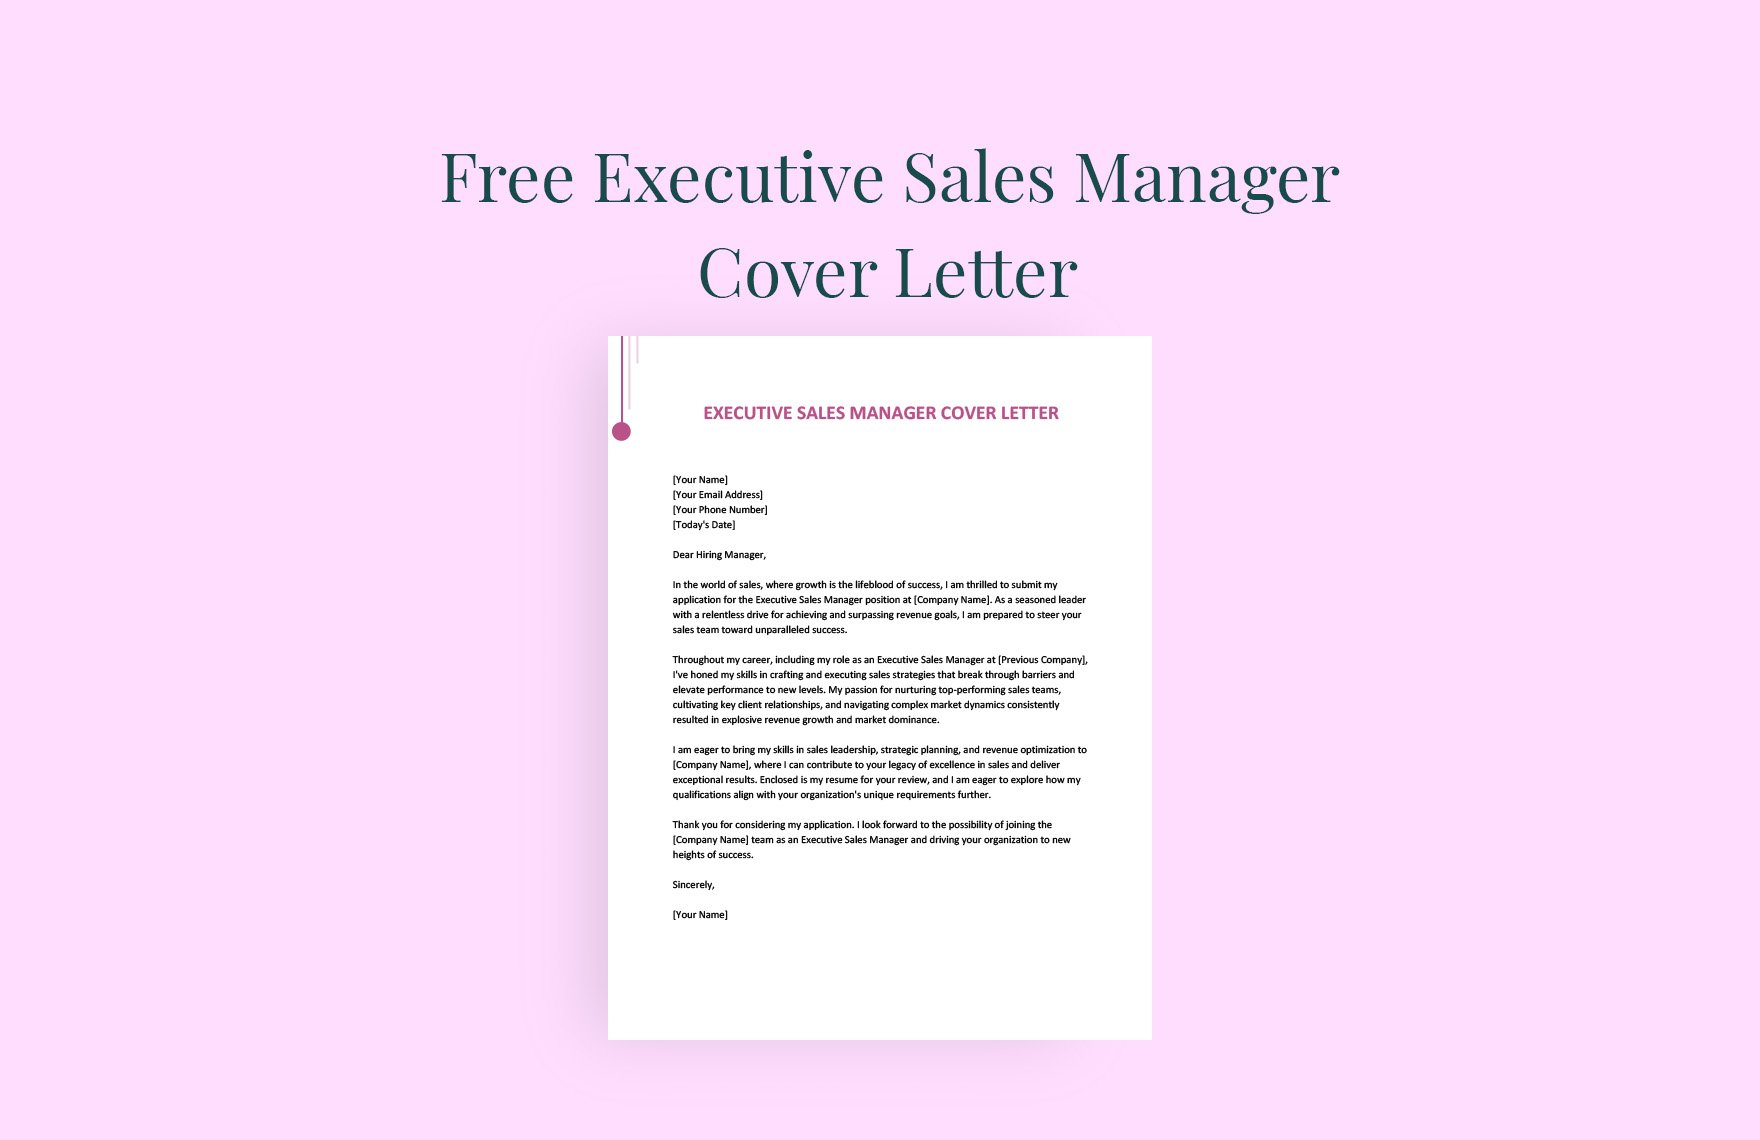 Executive Sales Manager Cover Letter in Word, Google Docs